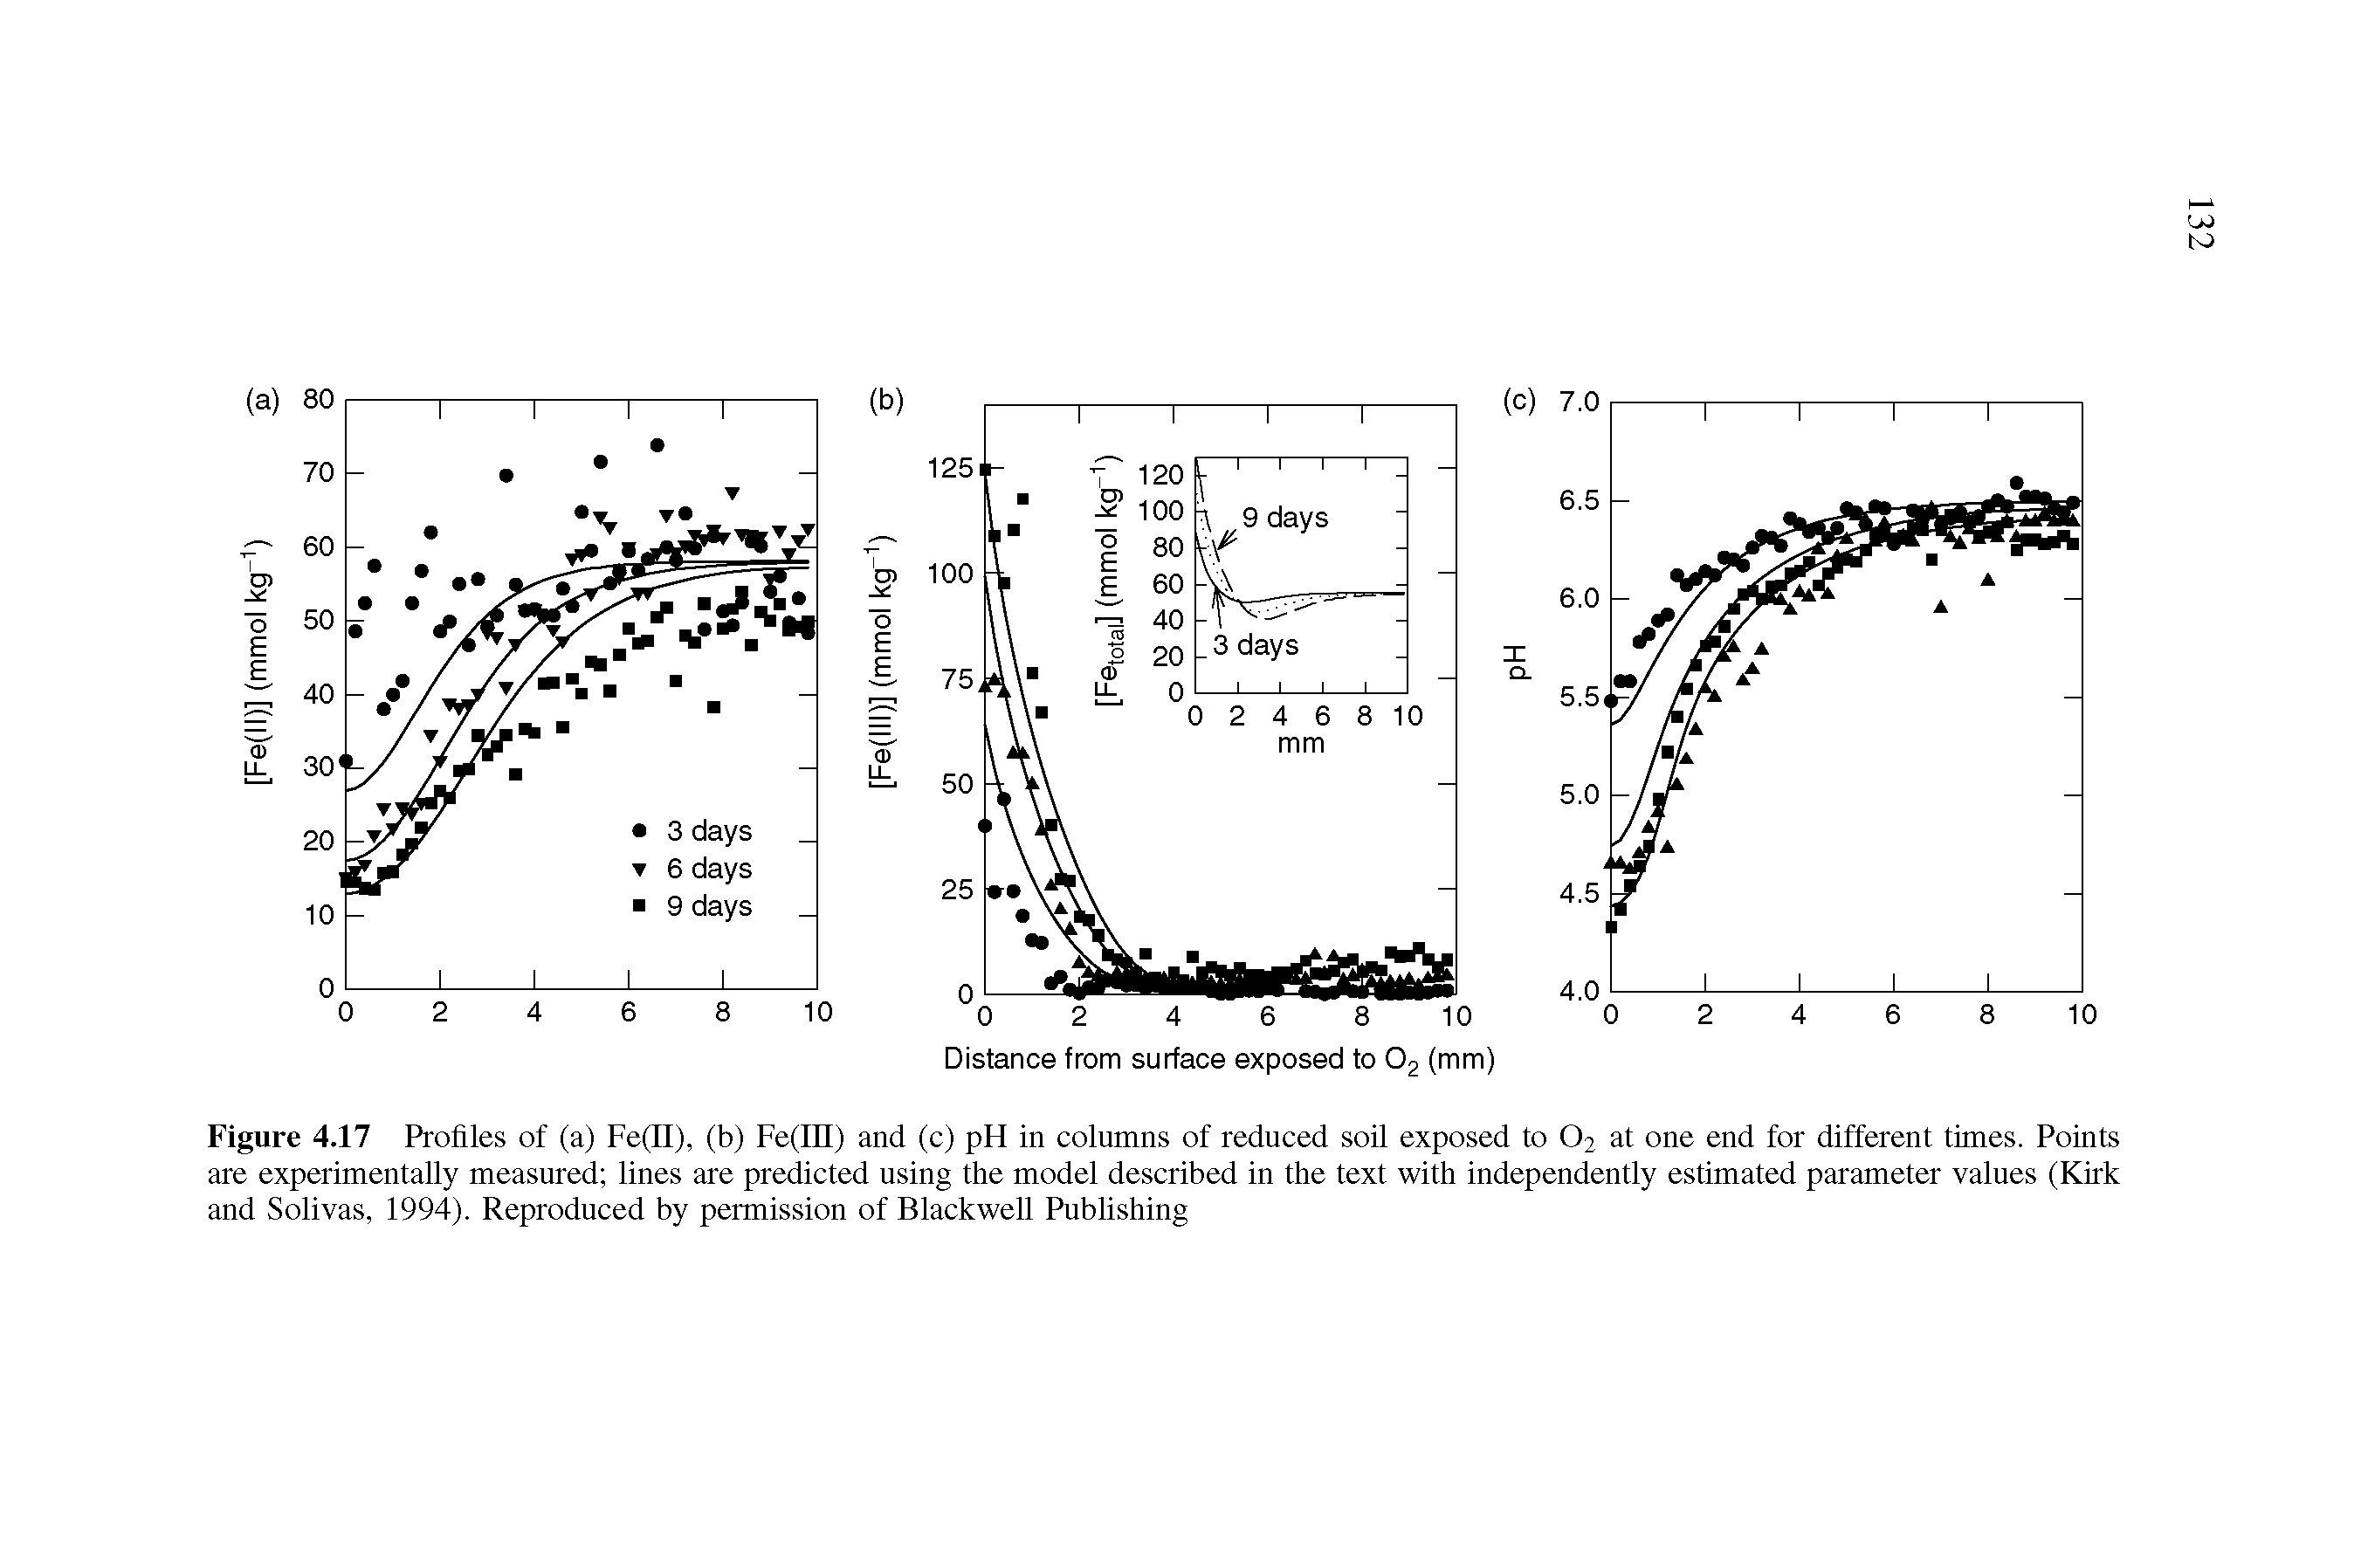 Figure 4.17 Profiles of (a) Fe(II), (b) Fe(III) and (c) pH in columns of reduced soil exposed to O2 at one end for different times. Points are experimentally measured lines are predicted using the model described in the text with independently estimated parameter values (Kirk and Solivas, 1994). Reproduced by permission of Blackwell Publishing...